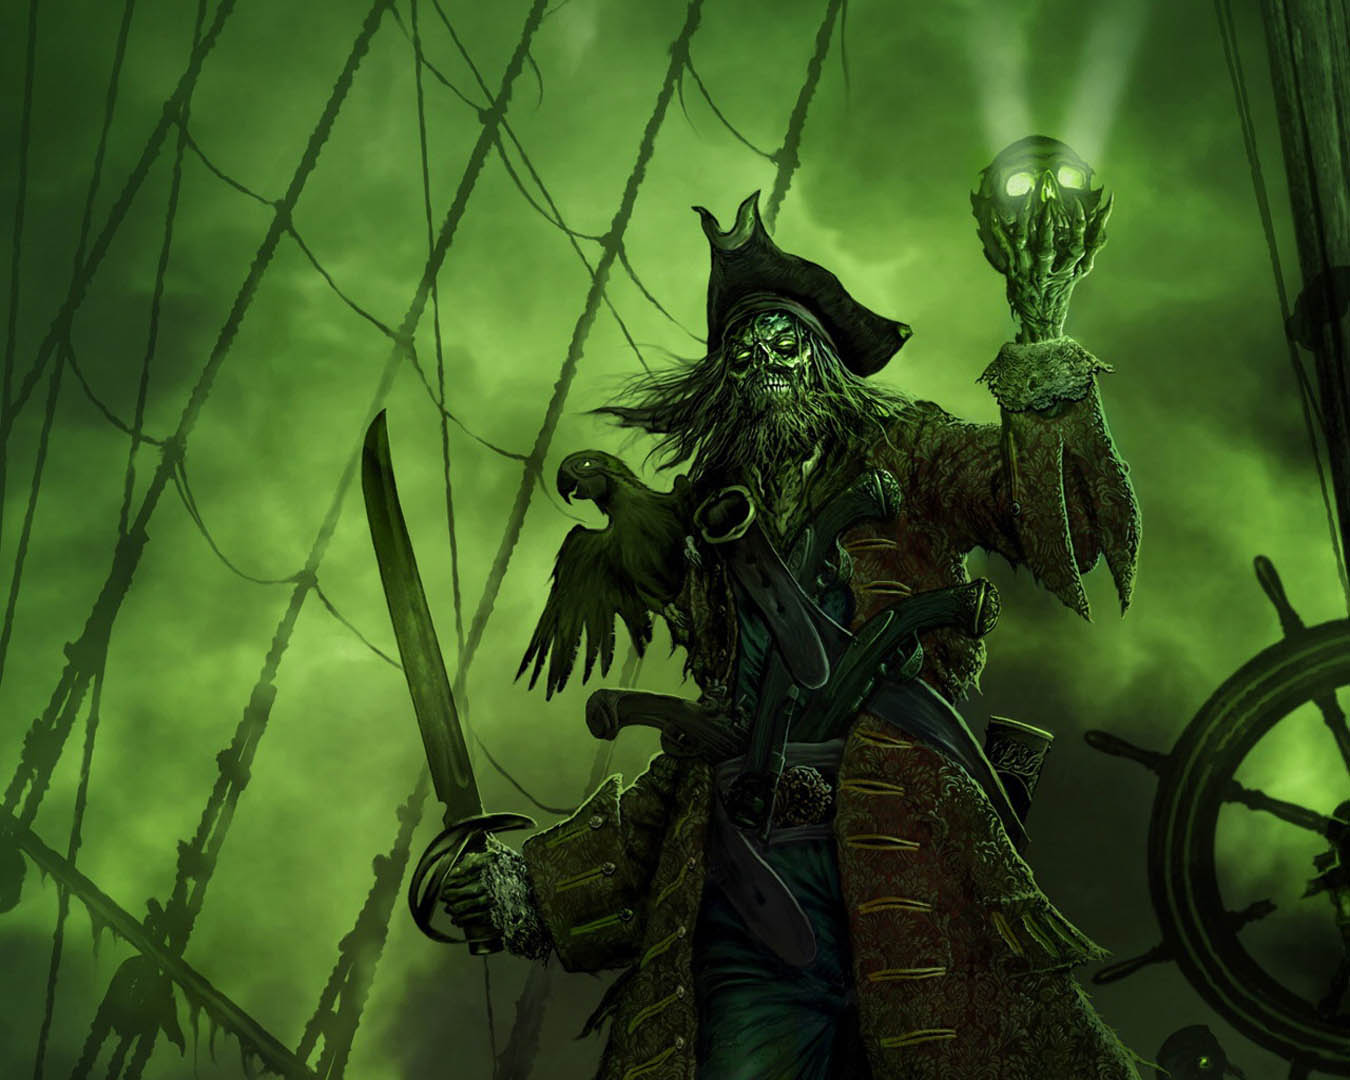 Free Download Zombie Pirate Fantasy Horror Wallpaper Image 1350x1080 For Your Desktop Mobile Tablet Explore 46 Moving Zombie Wallpaper Zombie Background Wallpaper Free Zombie Wallpaper Downloads Zombie Wallpapers For Windows Desktop